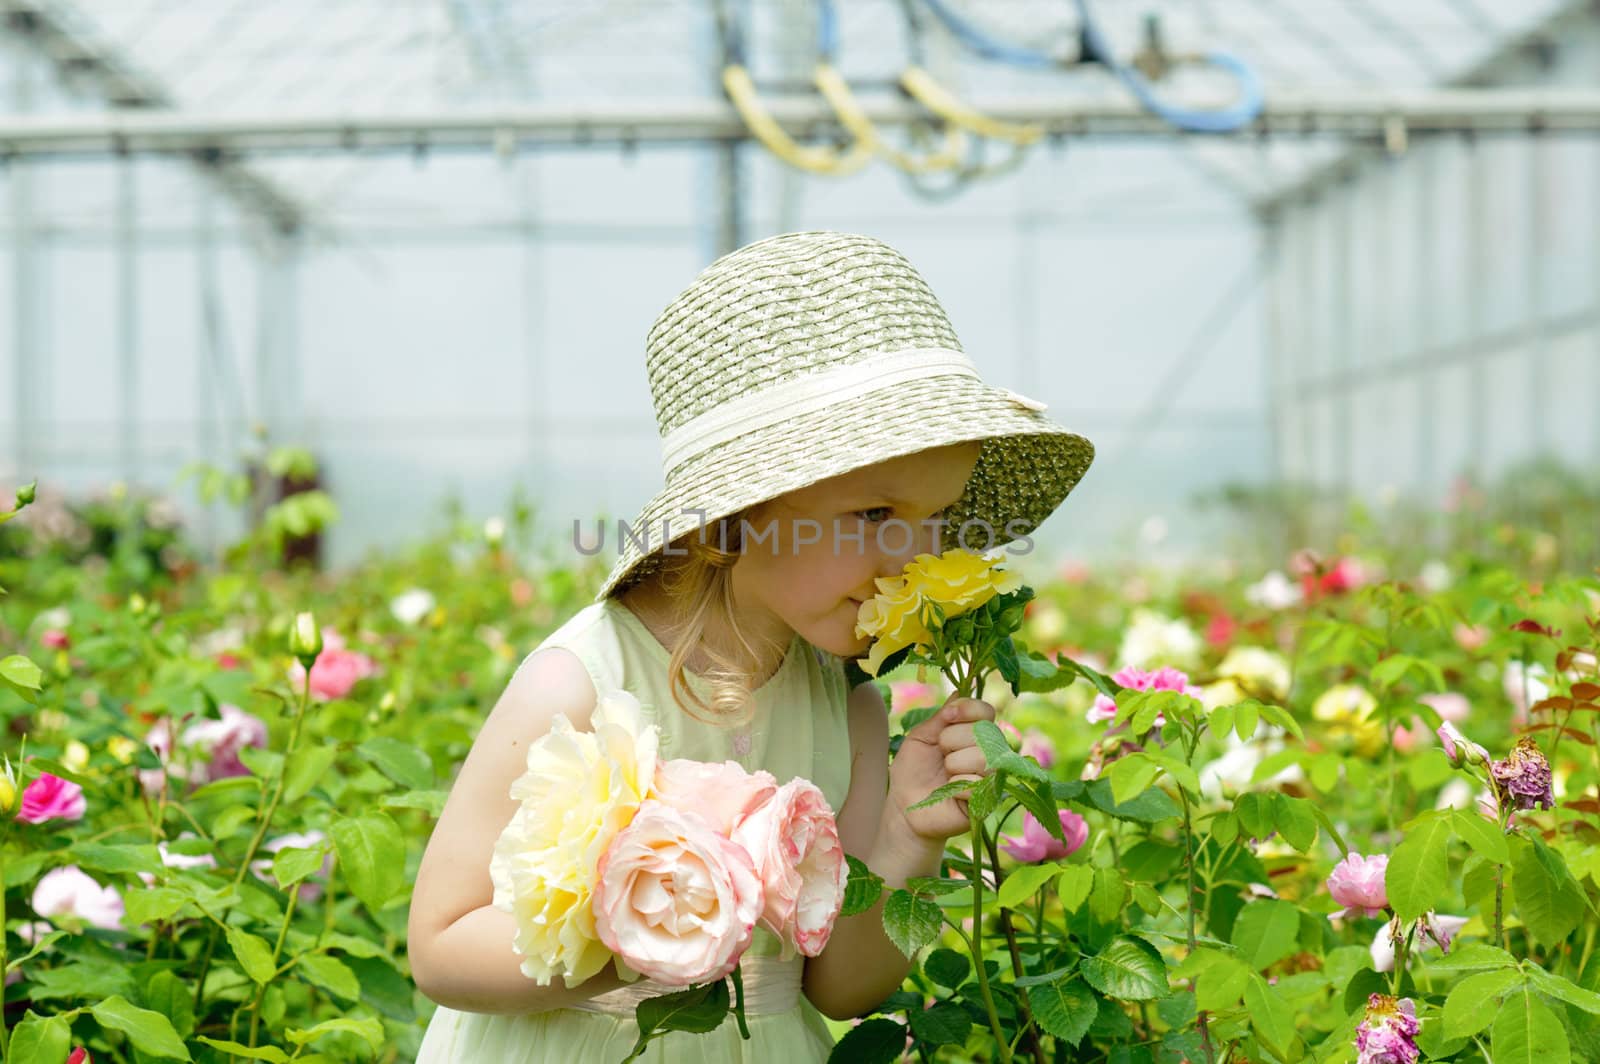 An image of a girl in a greenhouse